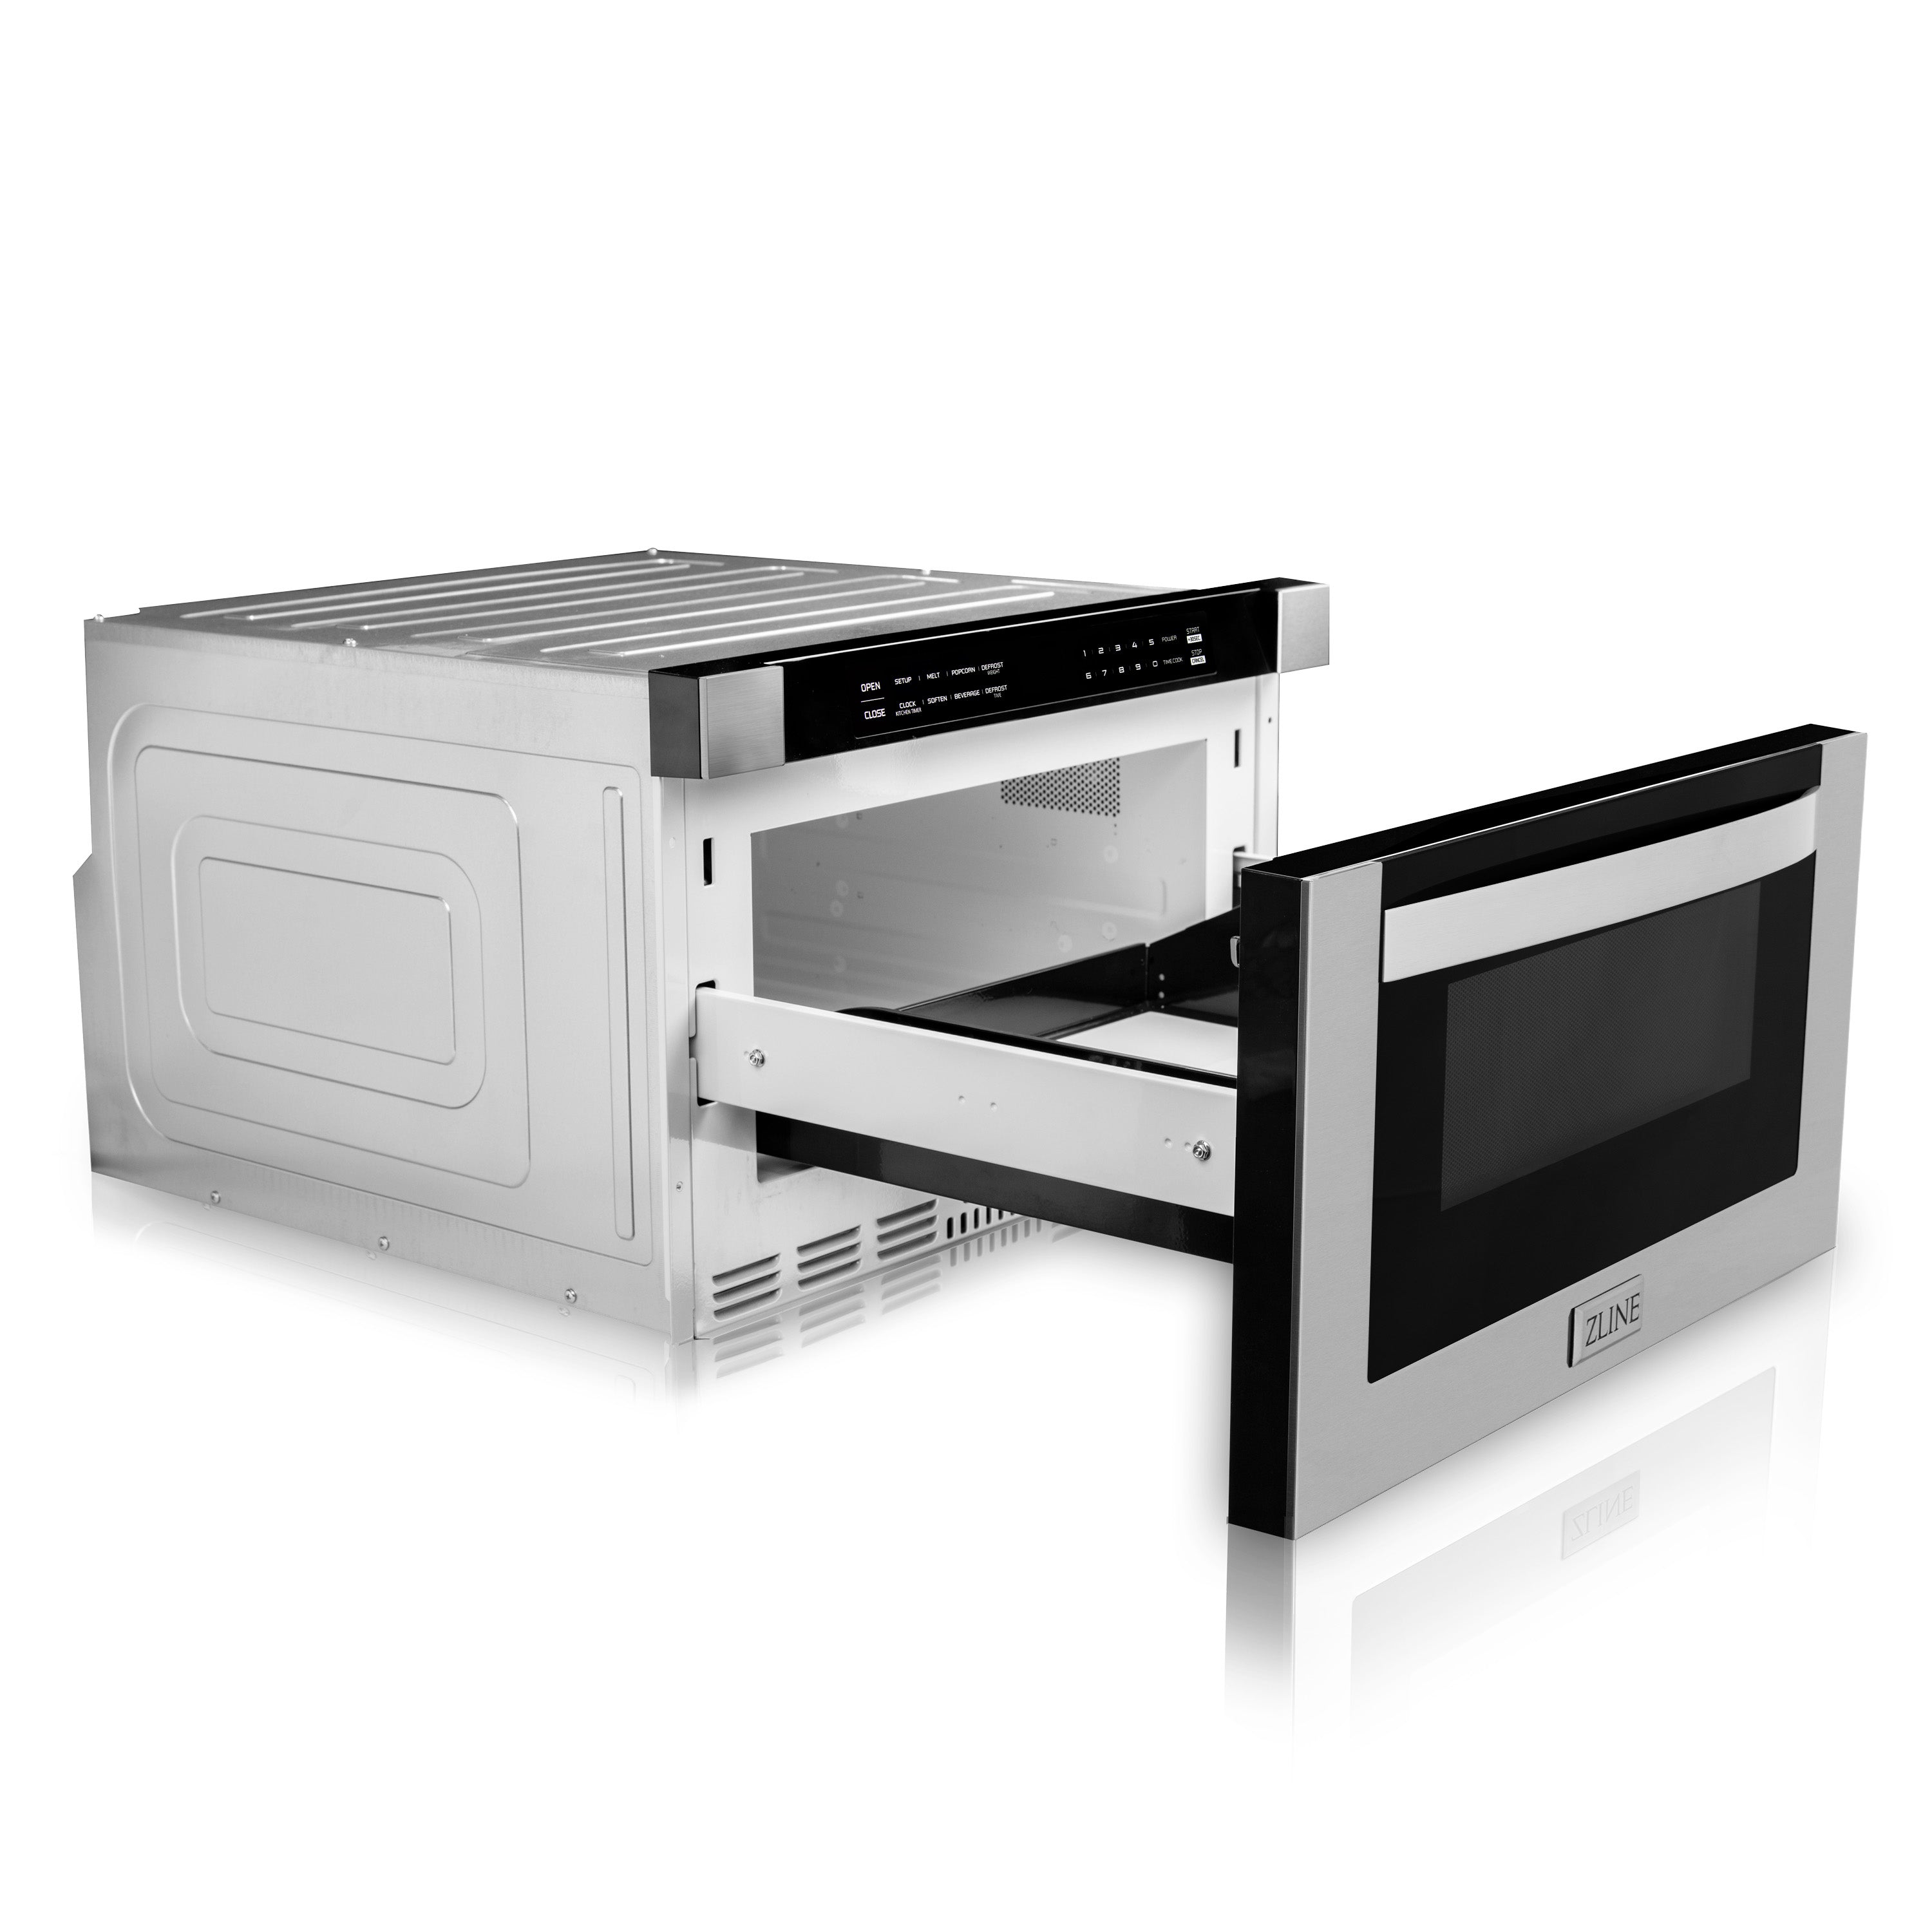 ZLINE Kitchen Package with Refrigeration, 48" Stainless Steel Dual Fuel Range, 48" Convertible Vent Range Hood, 24" Microwave Drawer, and 24" Tall Tub Dishwasher (5KPR-RARH48-MWDWV)